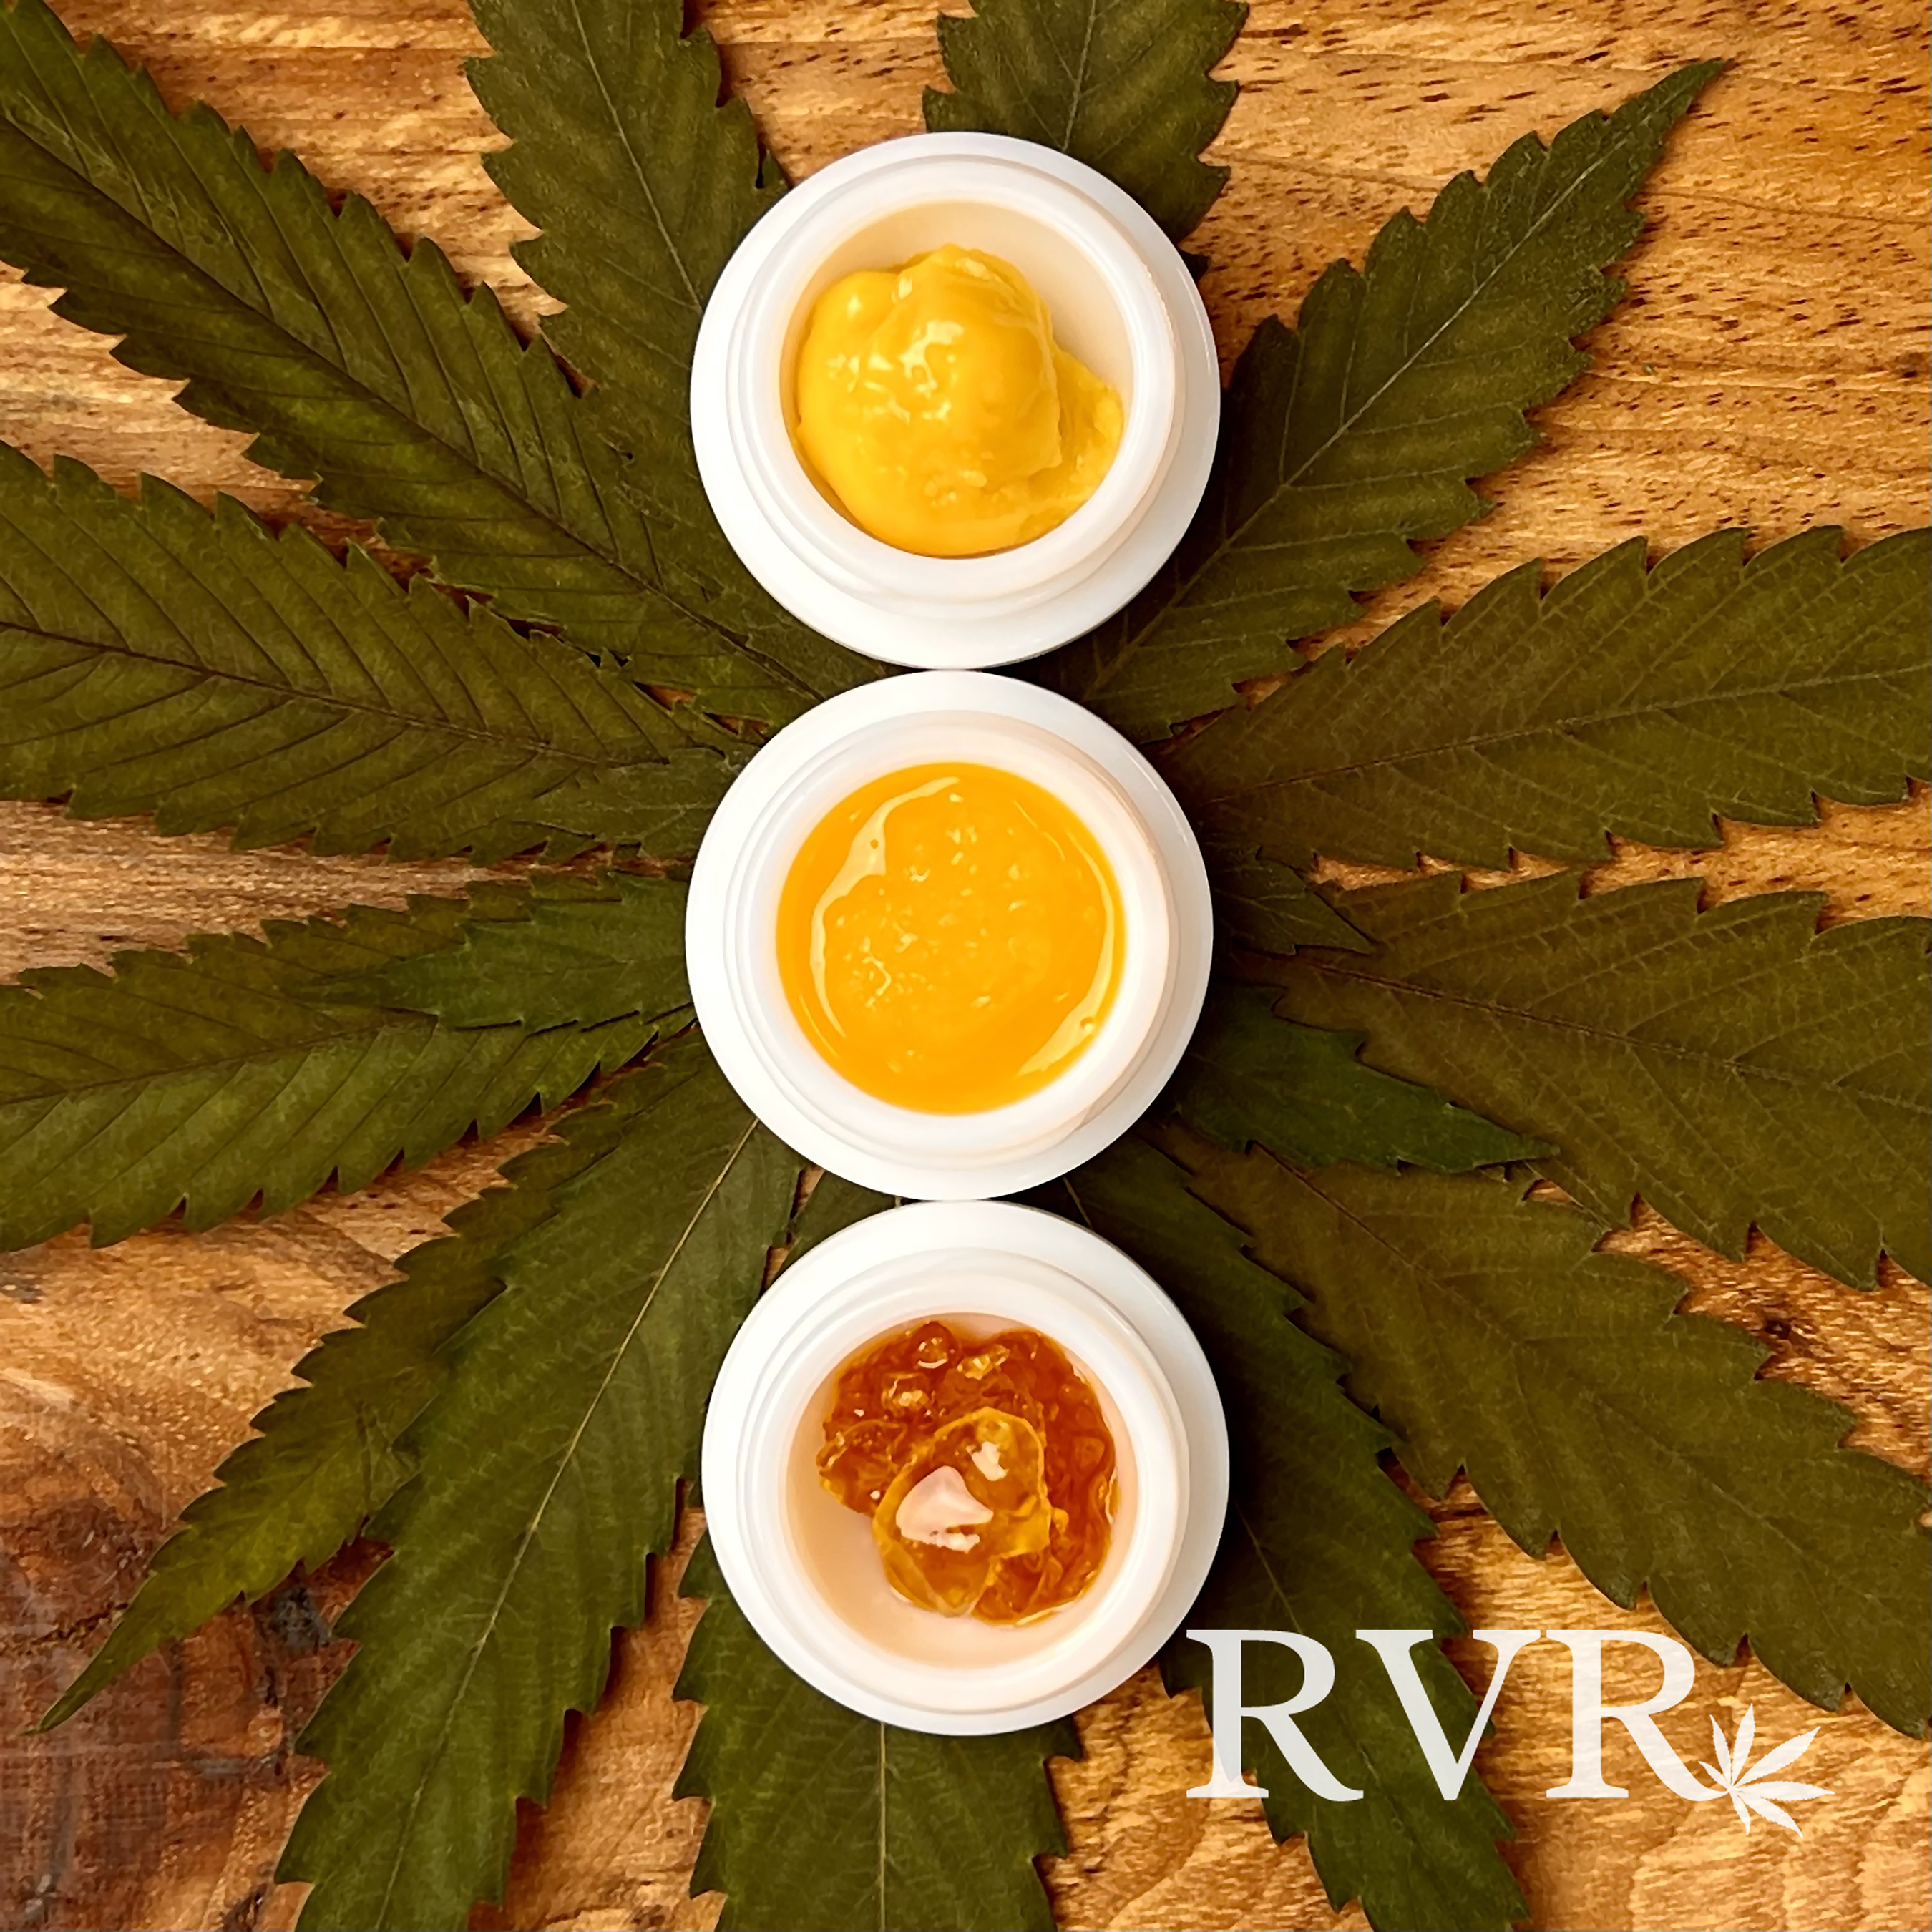 River Valley Relief Launches Relief by RVR Line of Marijuana Concentrates